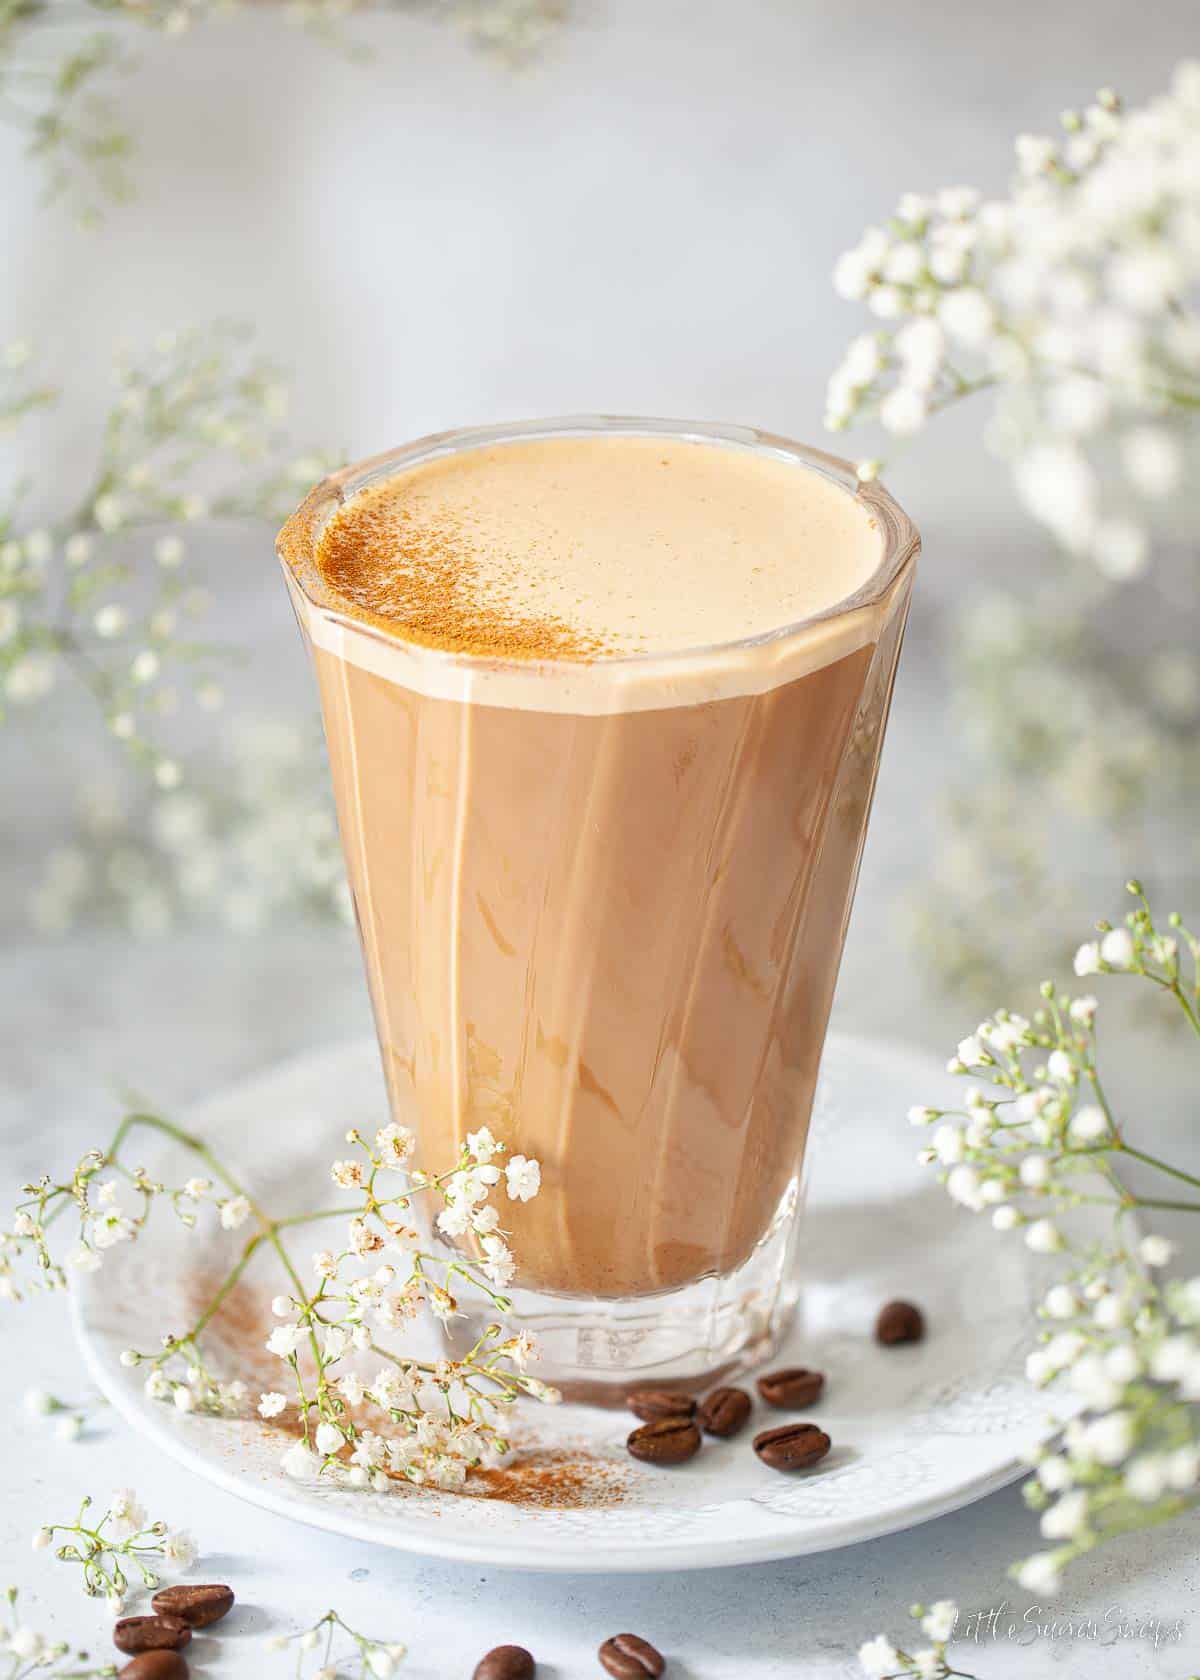 Honey latte presented in a modern coffee glass dusted with ground cinnamon.